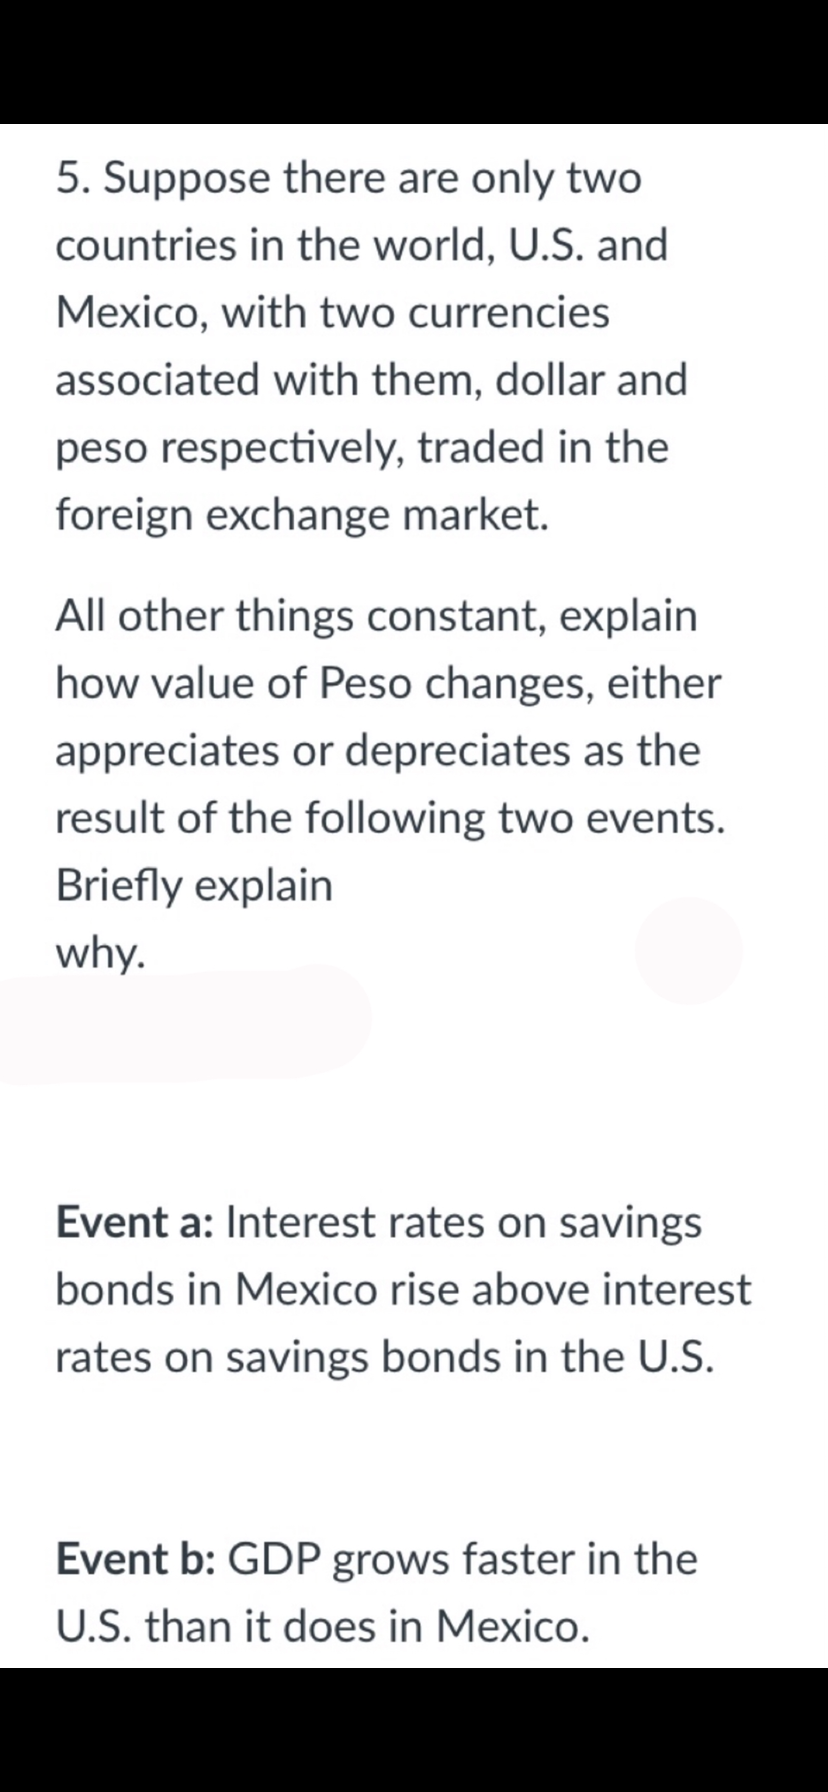 5. Suppose there are only two
countries in the world, U.S. and
Mexico, with two currencies
associated with them, dollar and
peso respectively, traded in the
foreign exchange market.
All other things constant, explain
how value of Peso changes, either
appreciates or depreciates as the
result of the following two events.
Briefly explain
why.
Event a: Interest rates on savings
bonds in Mexico rise above interest
rates on savings bonds in the U.S.
Event b: GDP grows faster in the
U.S. than it does in Mexico.
